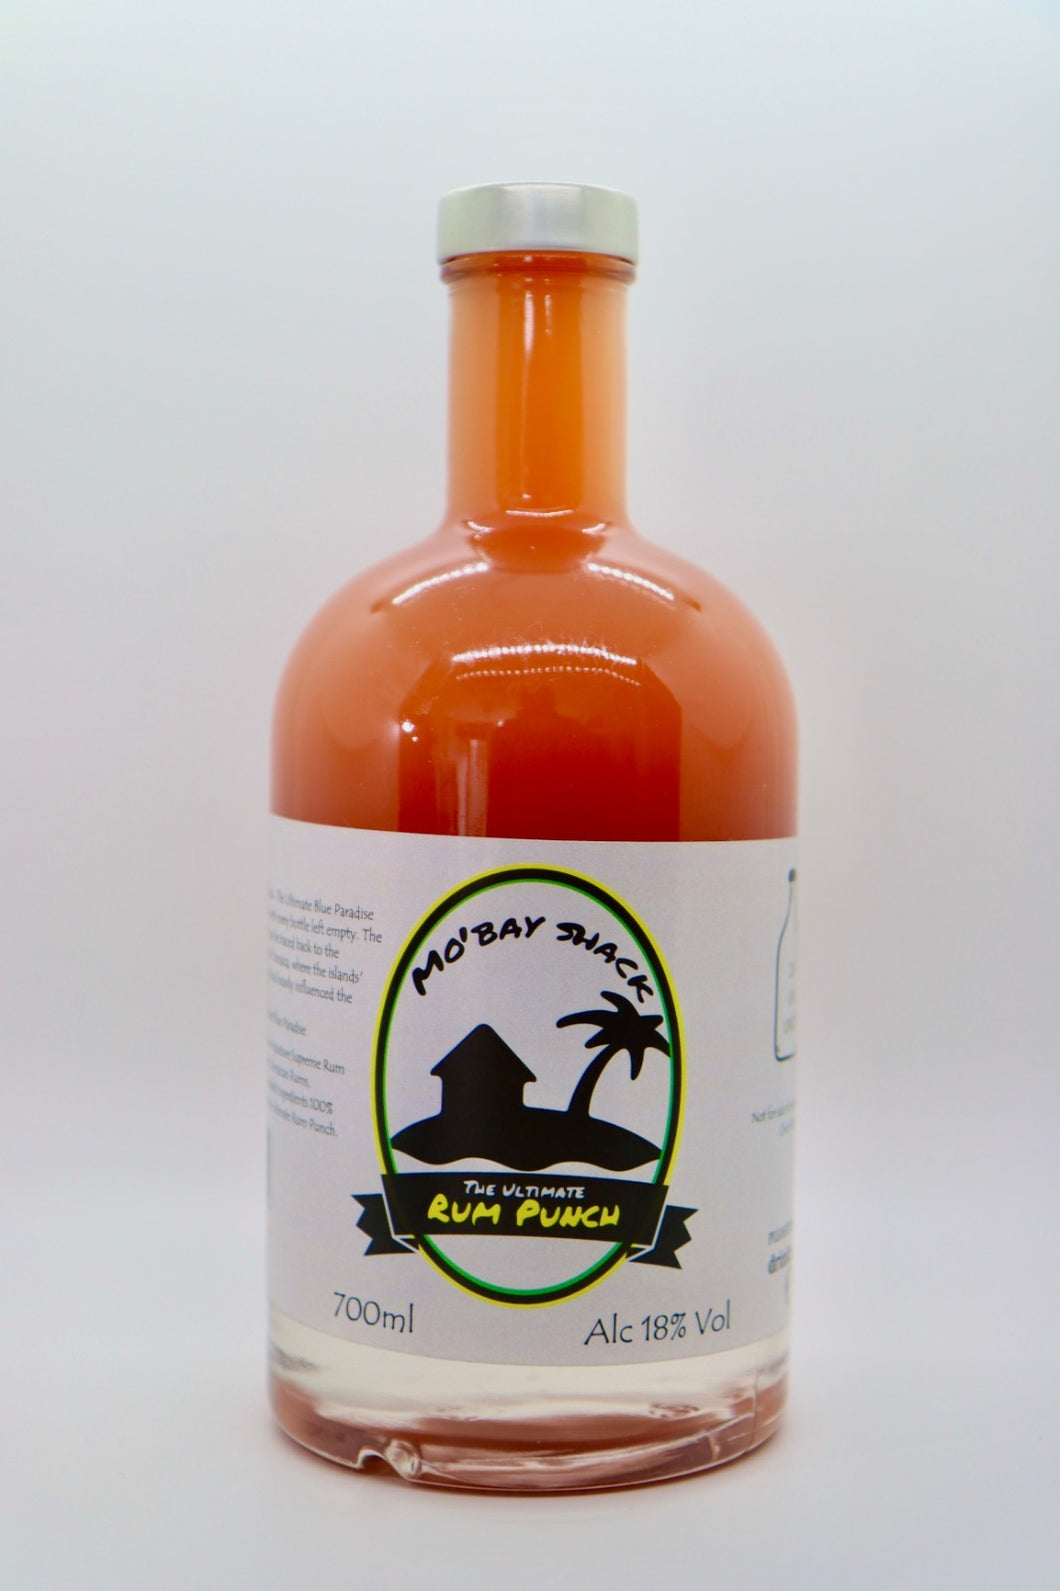 Mo'Bay Shack - The Ultimate Rum Punch  -700ml Polo Bottle